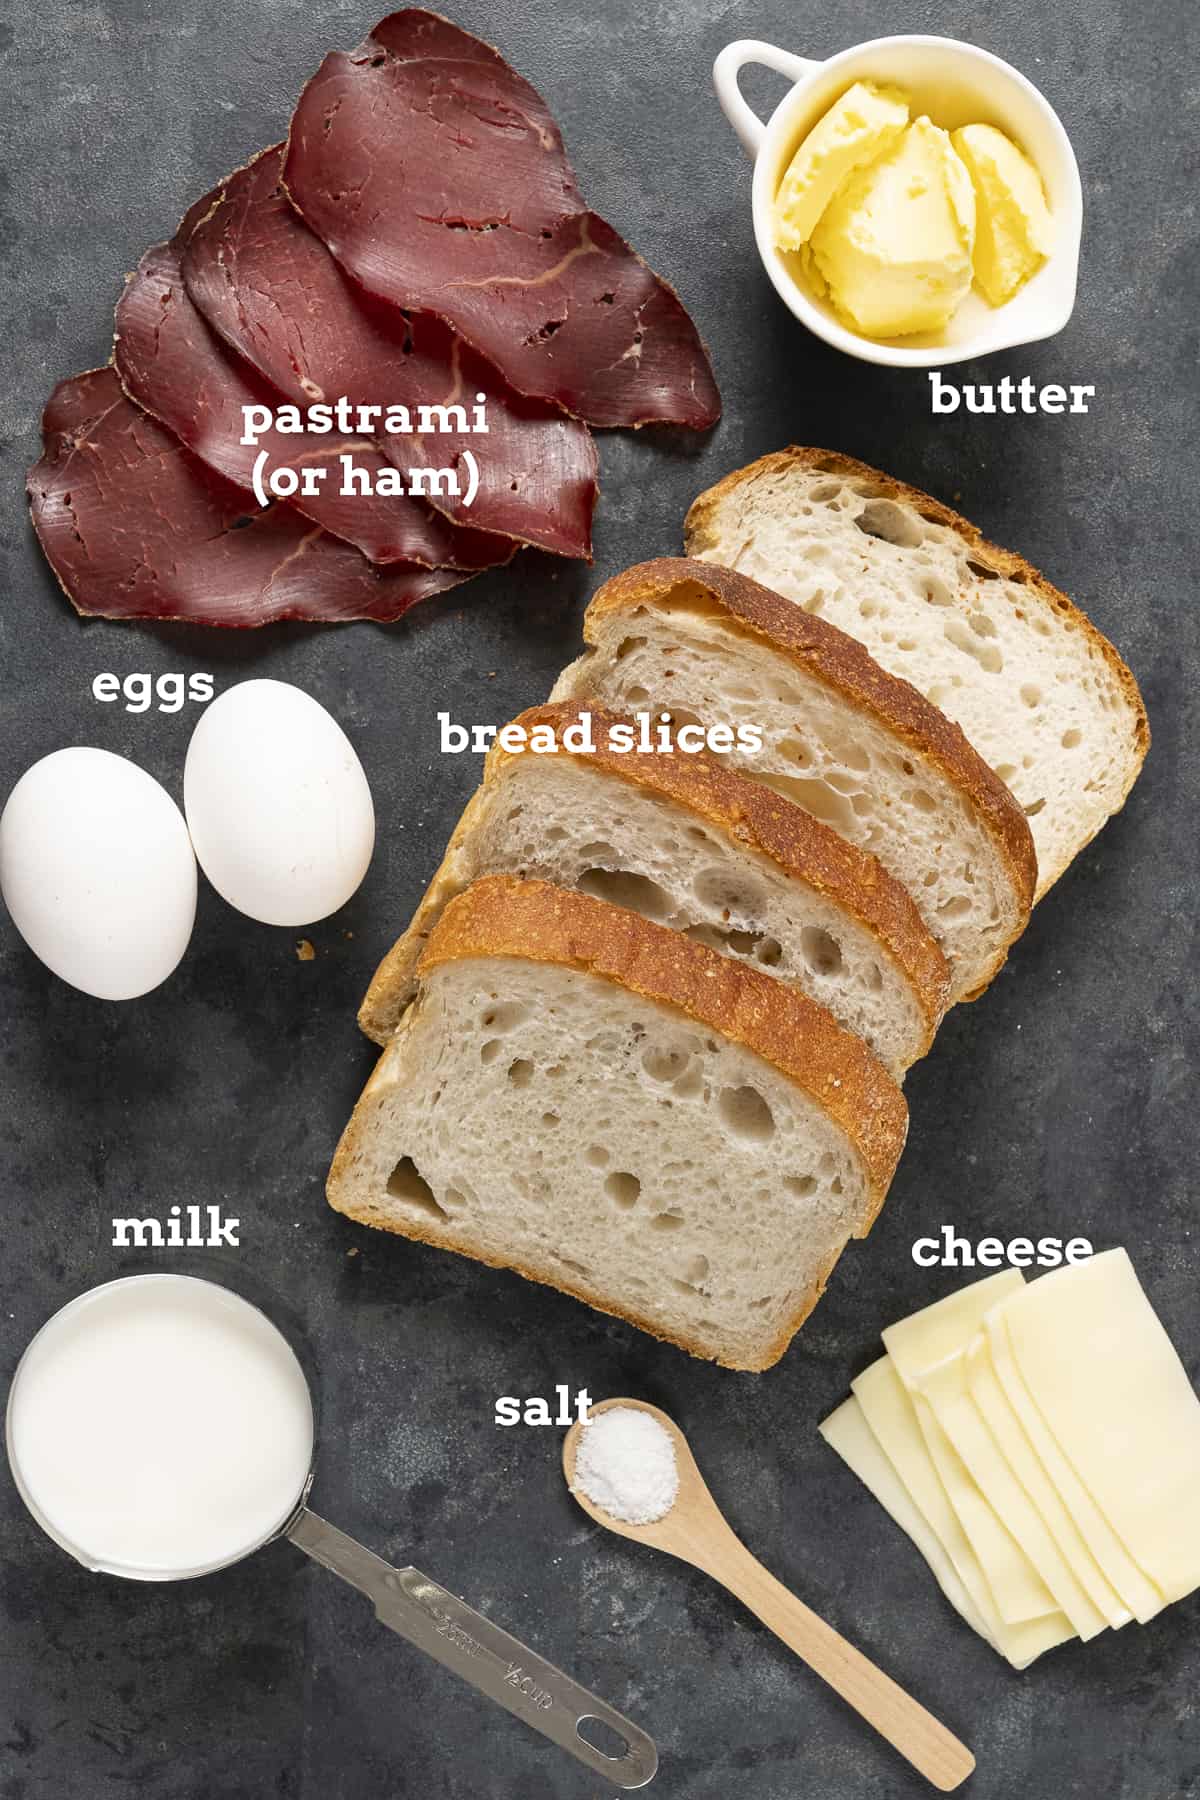 Eggs, cold meat slices, butter, bread slices, cheese lices, milk and salt on a dark background.